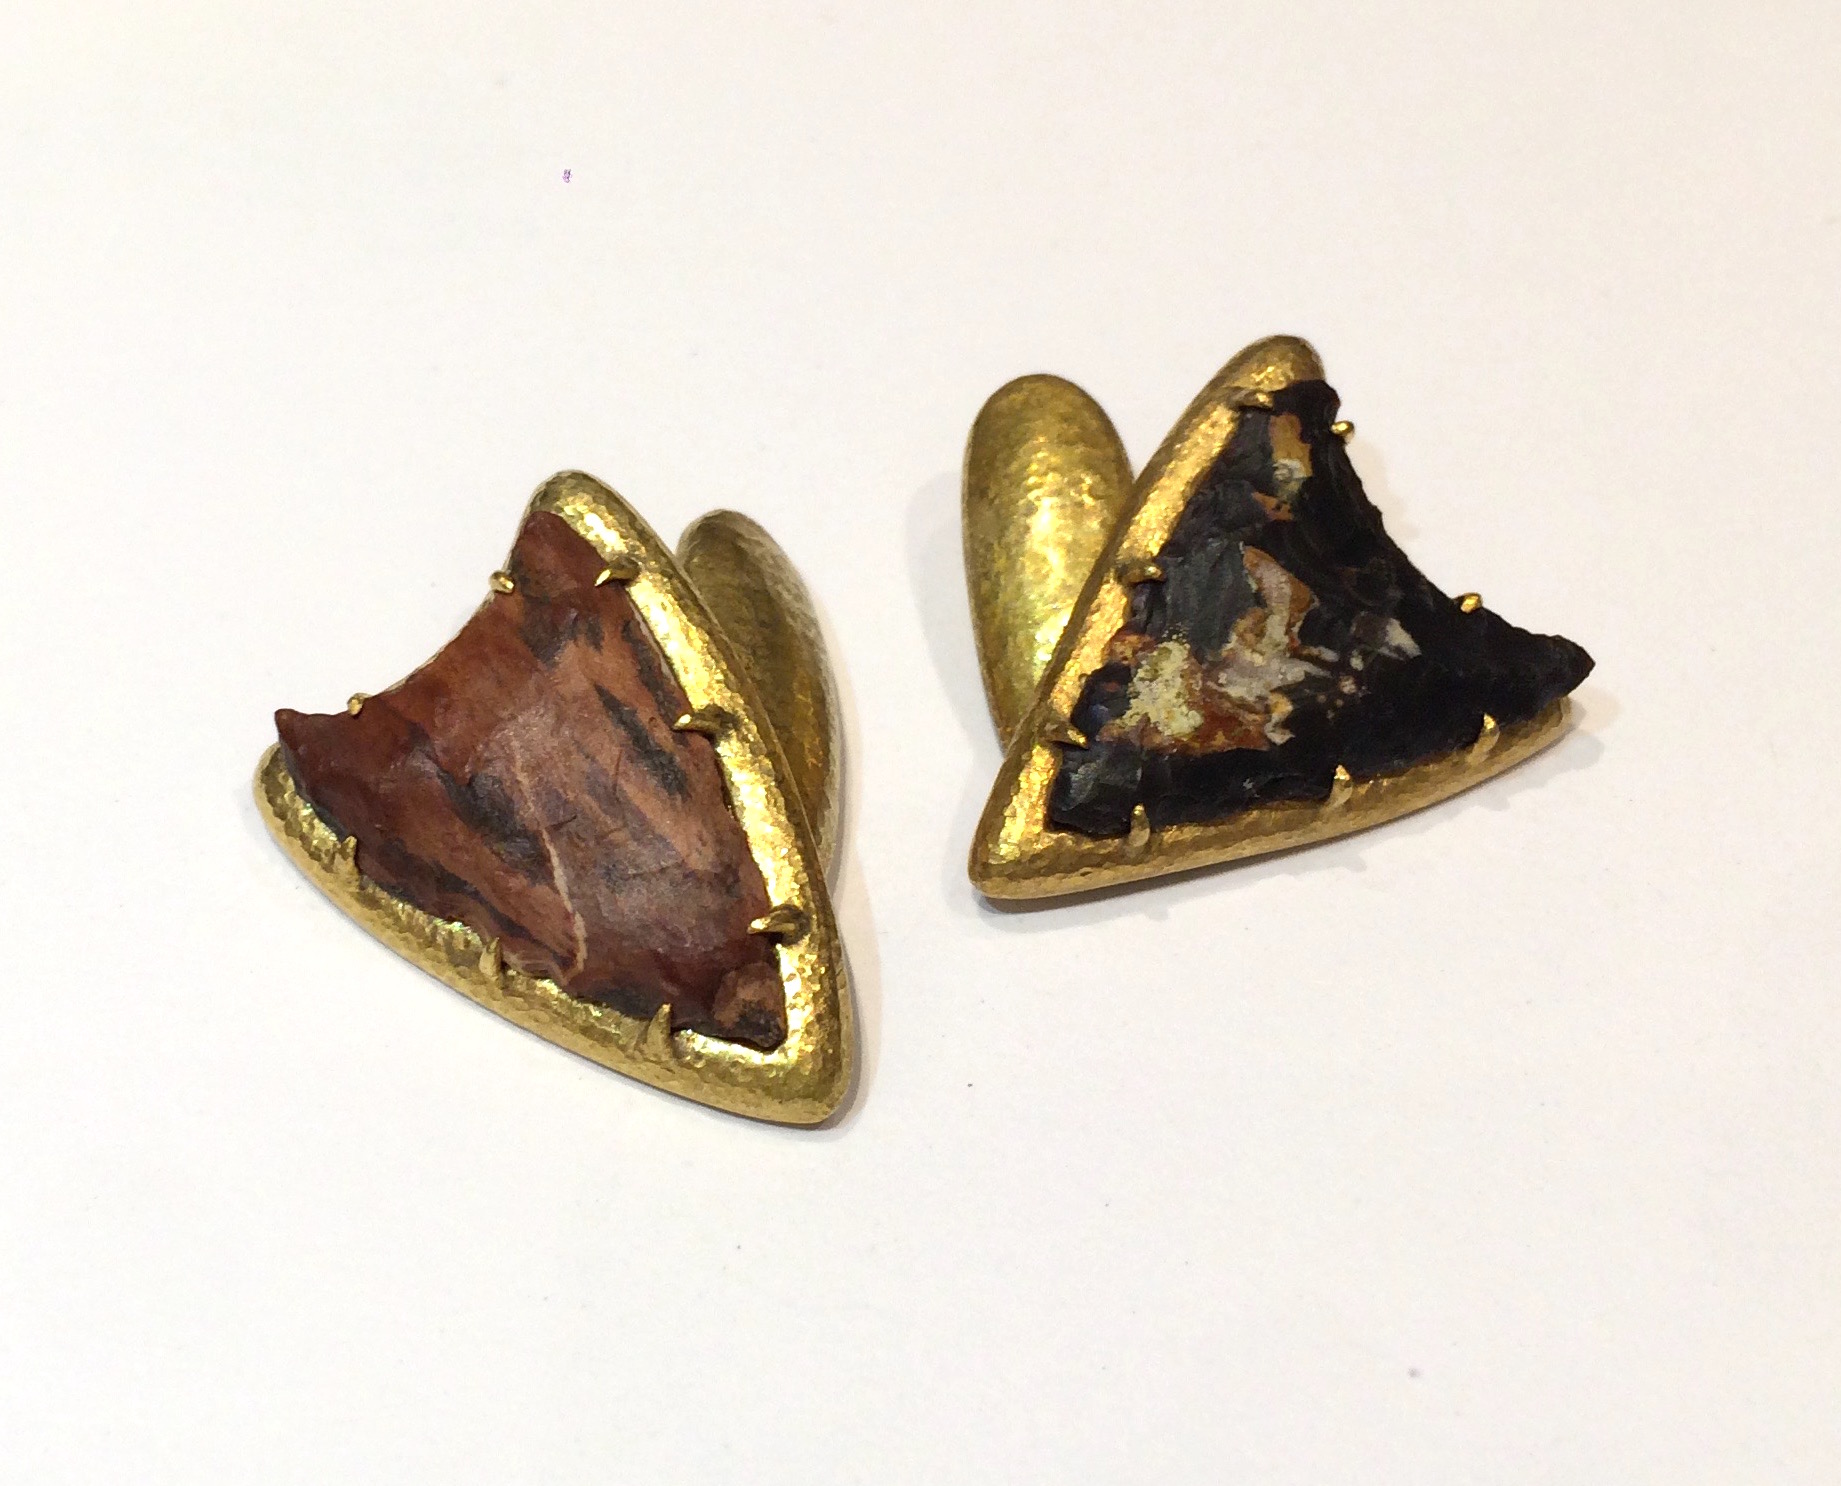 Federico DeVera “Arrowhead” cufflinks, high carat gold plated hand wrought and hand hammered 18k gold, c. 2005